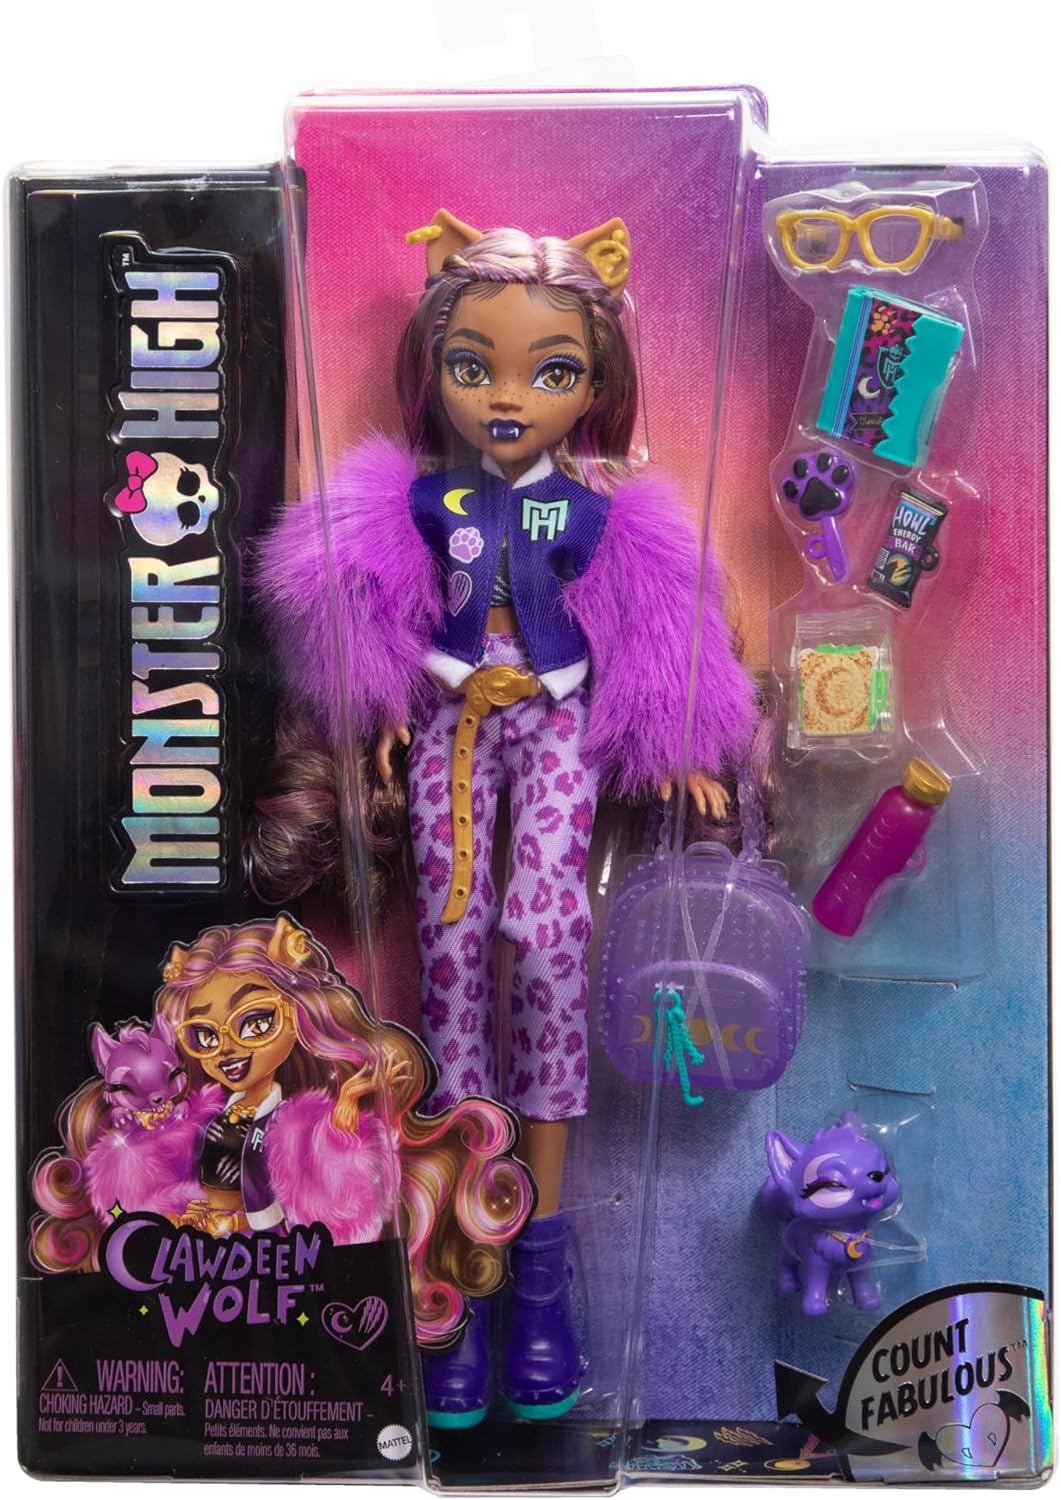 Monster High Clawdeen Wolf Fashion Doll with Pet and Accessories